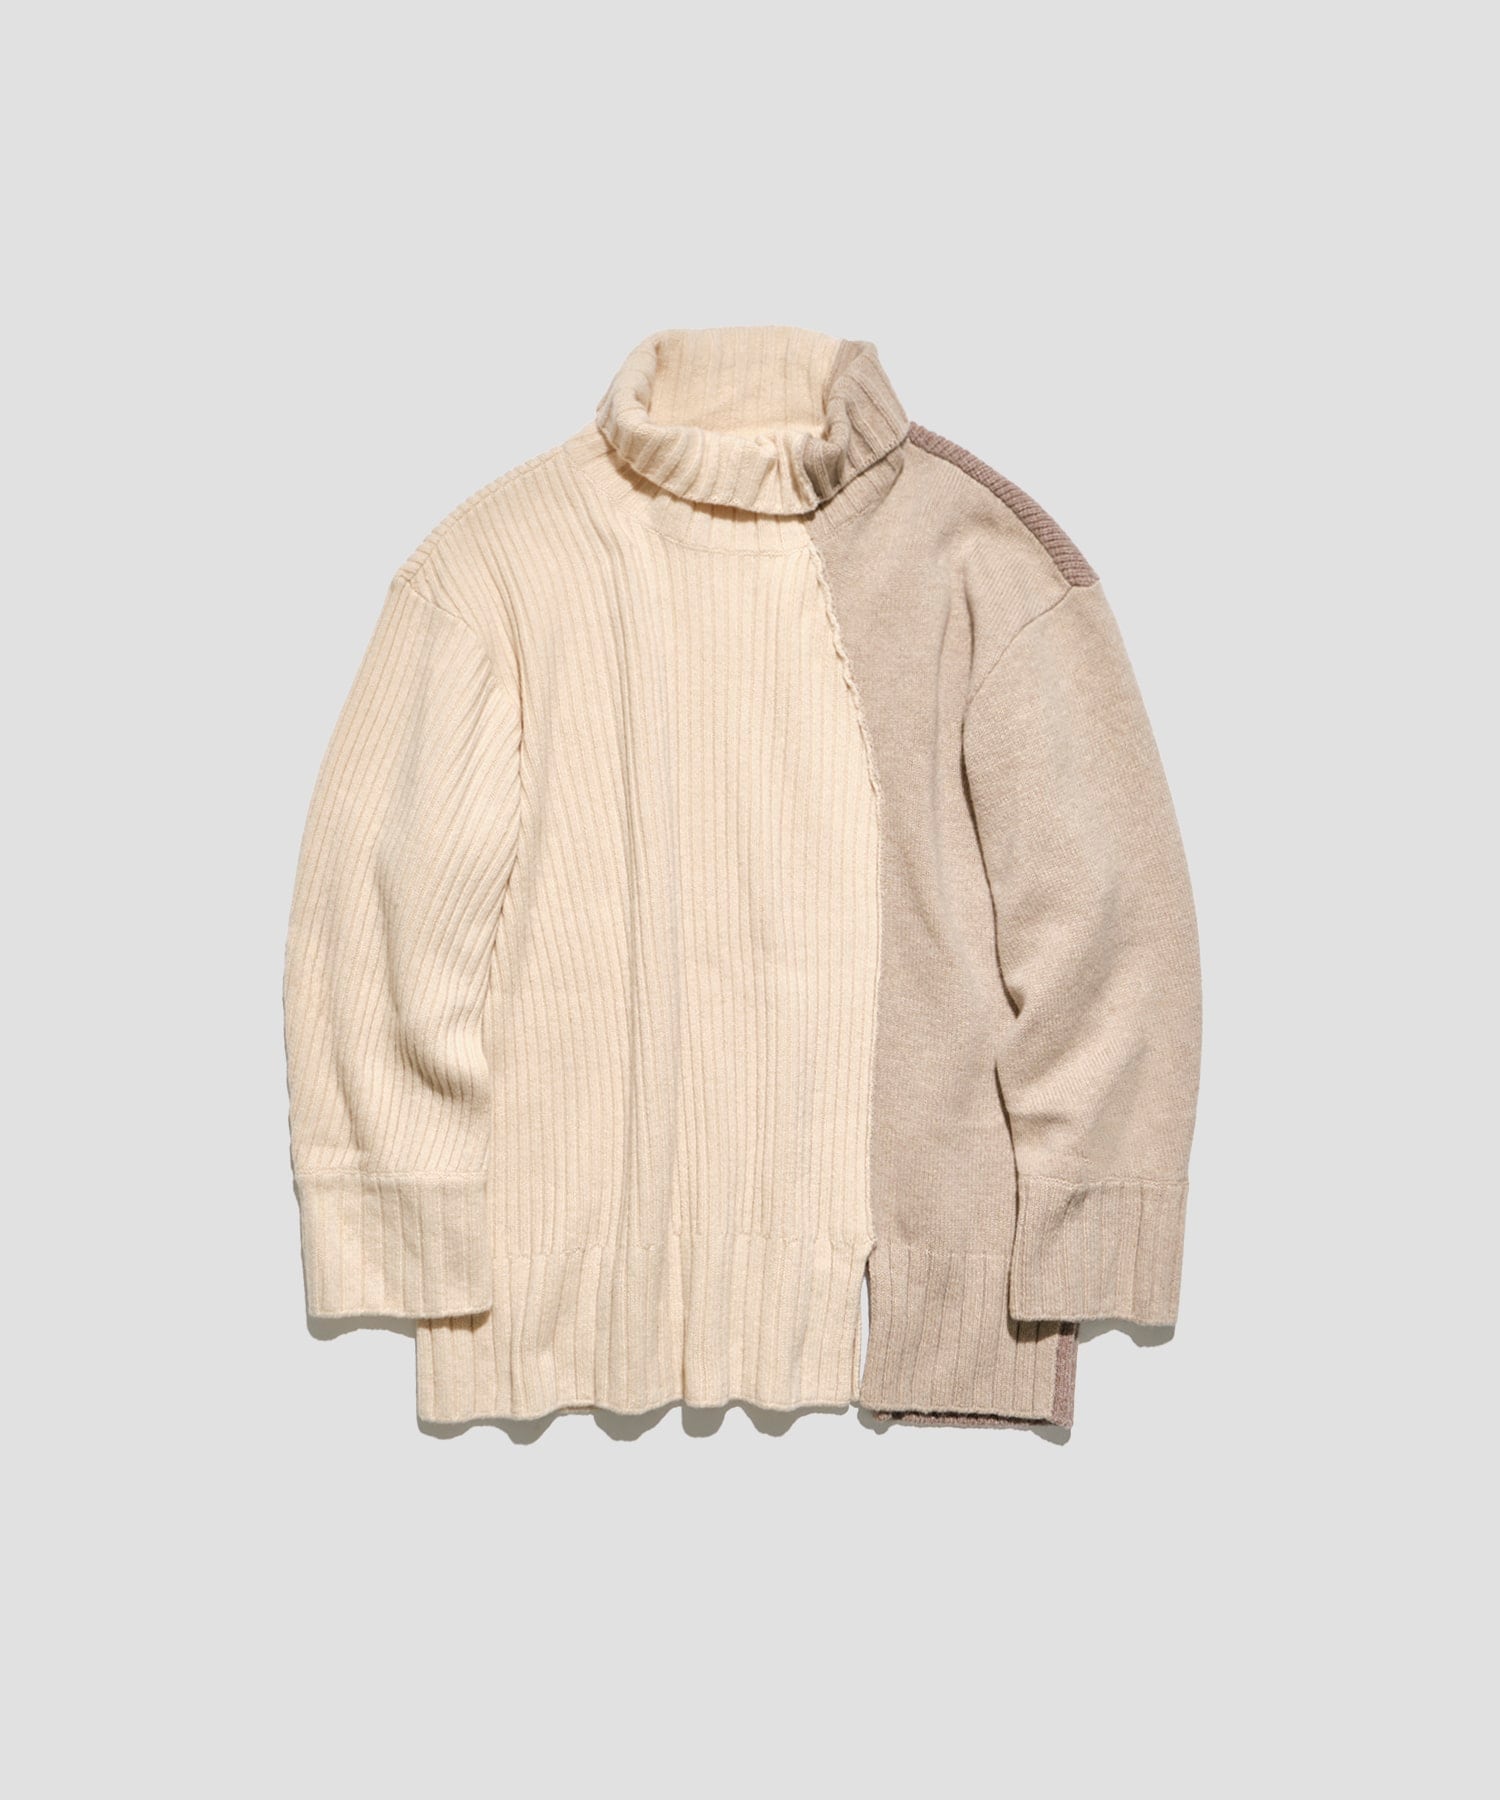 ujoh Cropped Turtle Neck Knit  美品タートルニット